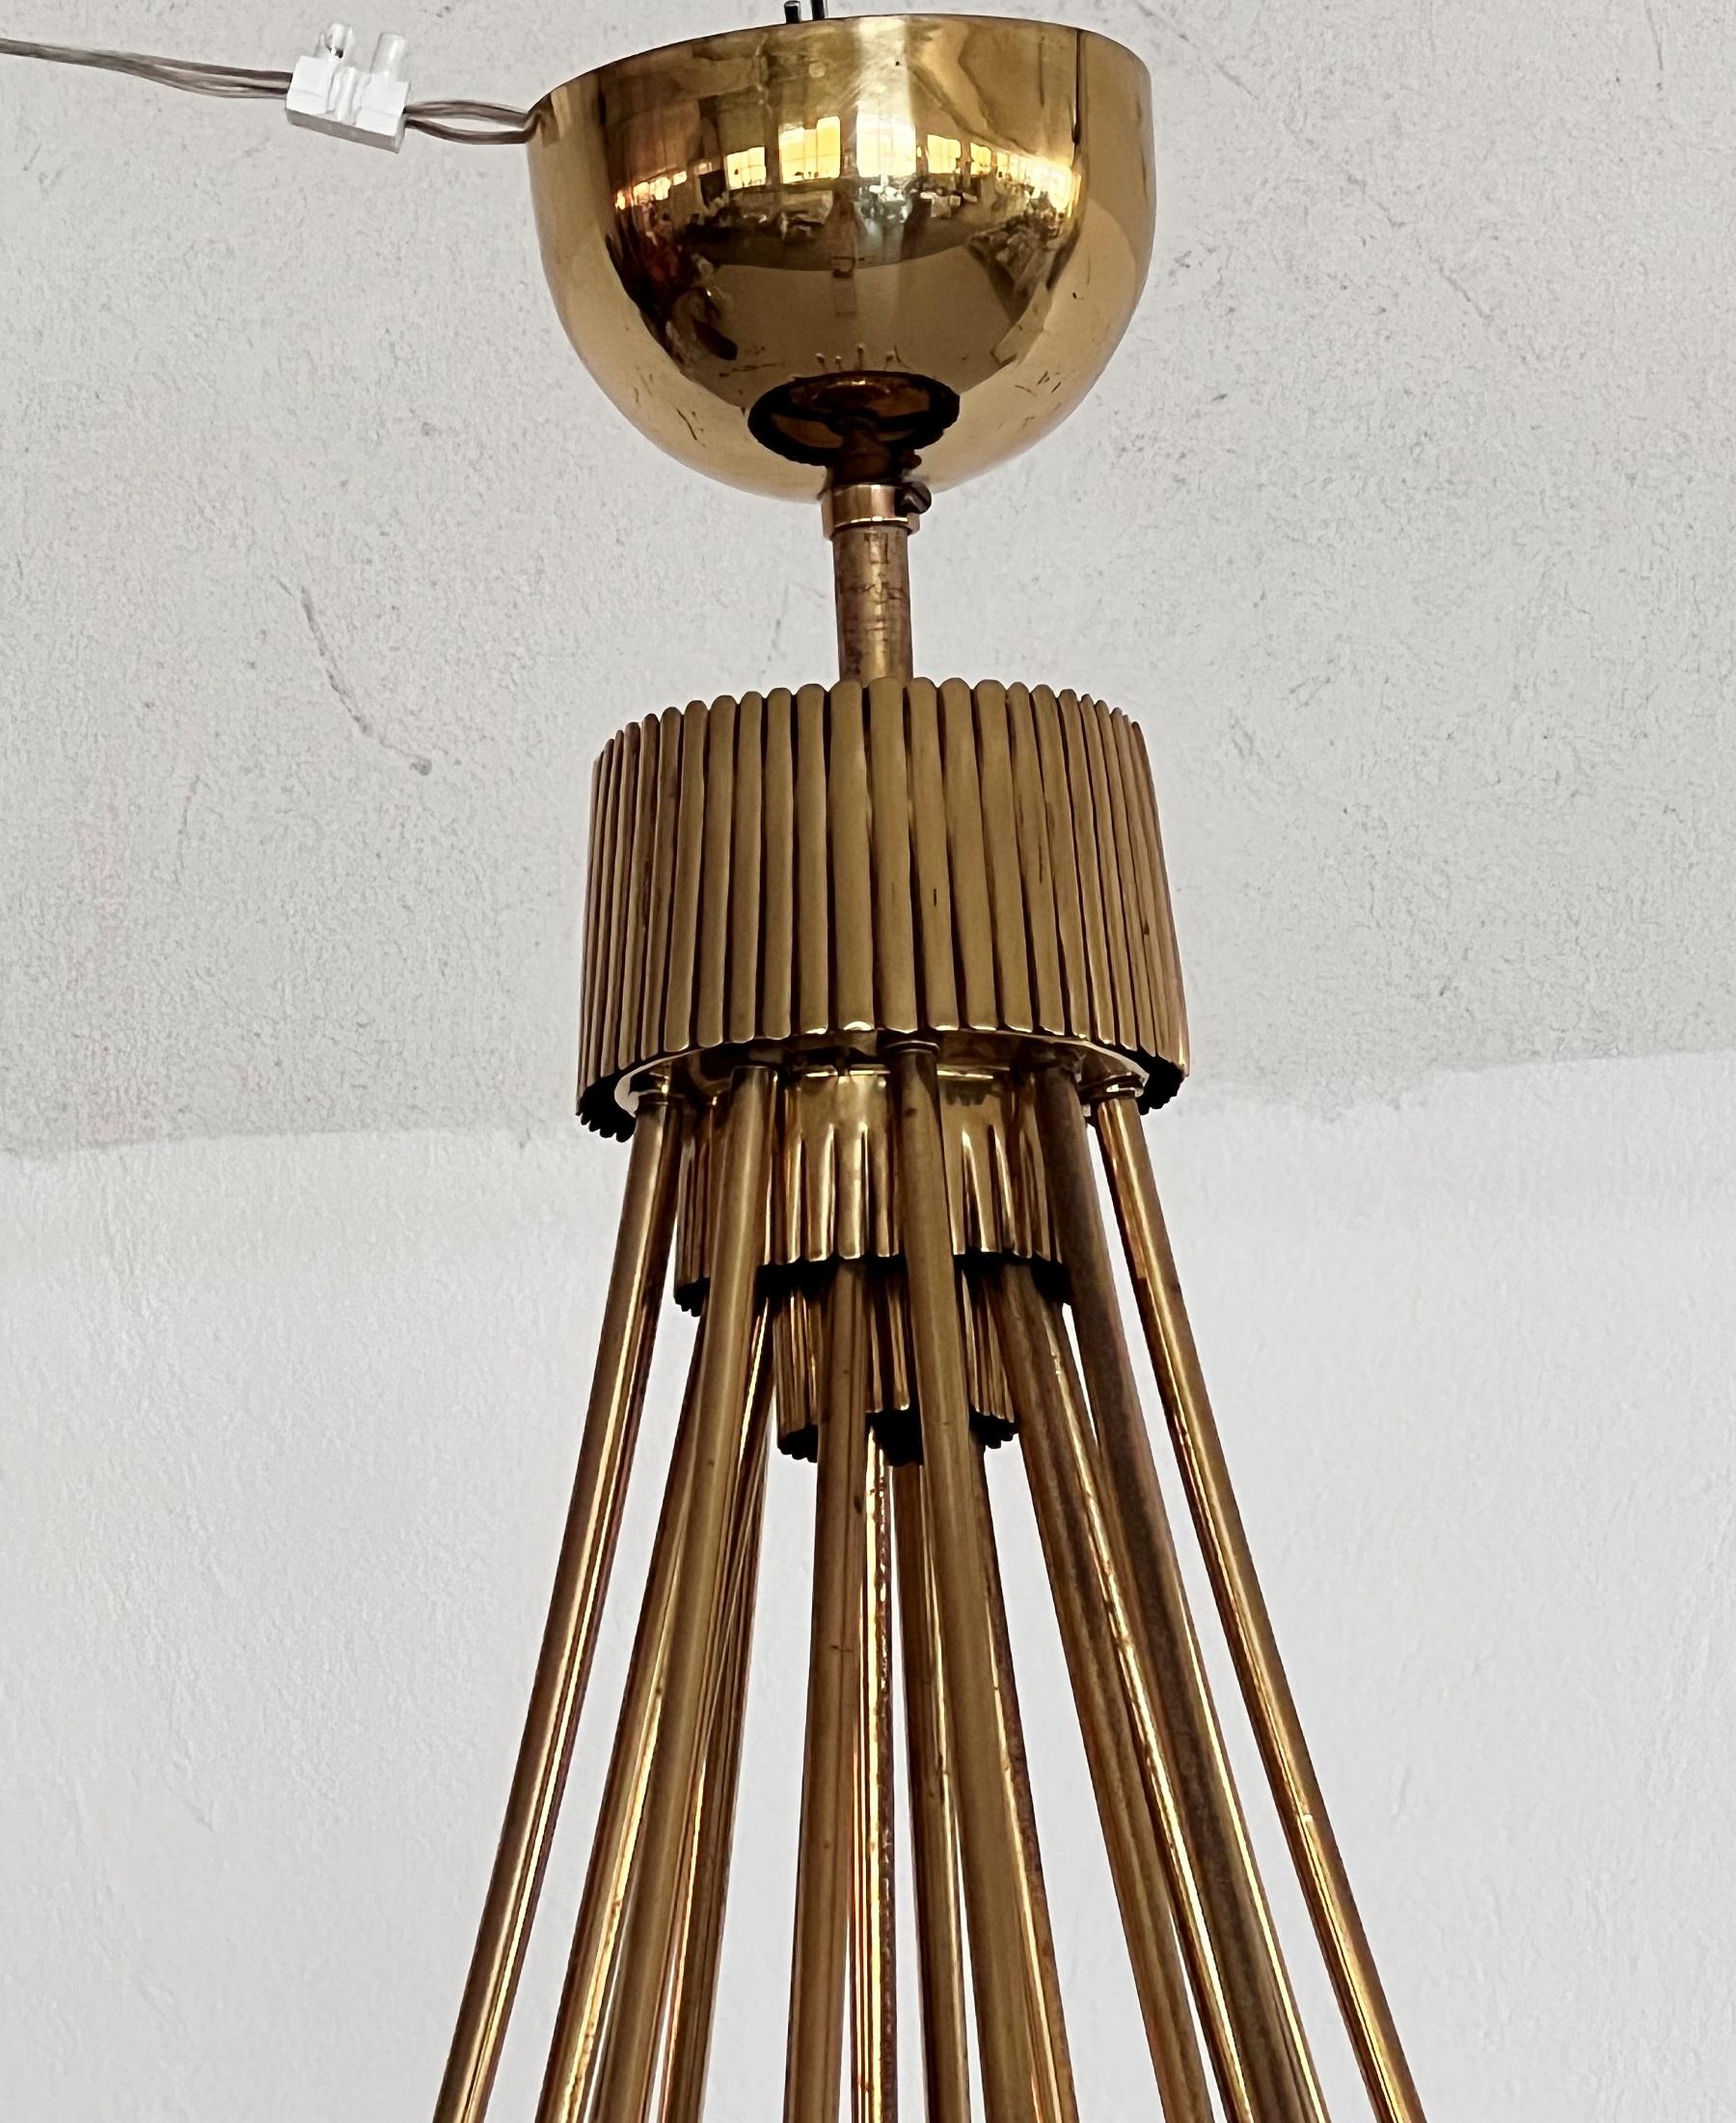 Italian Chandelier in Brass with 18 Lights, 1970s For Sale 10